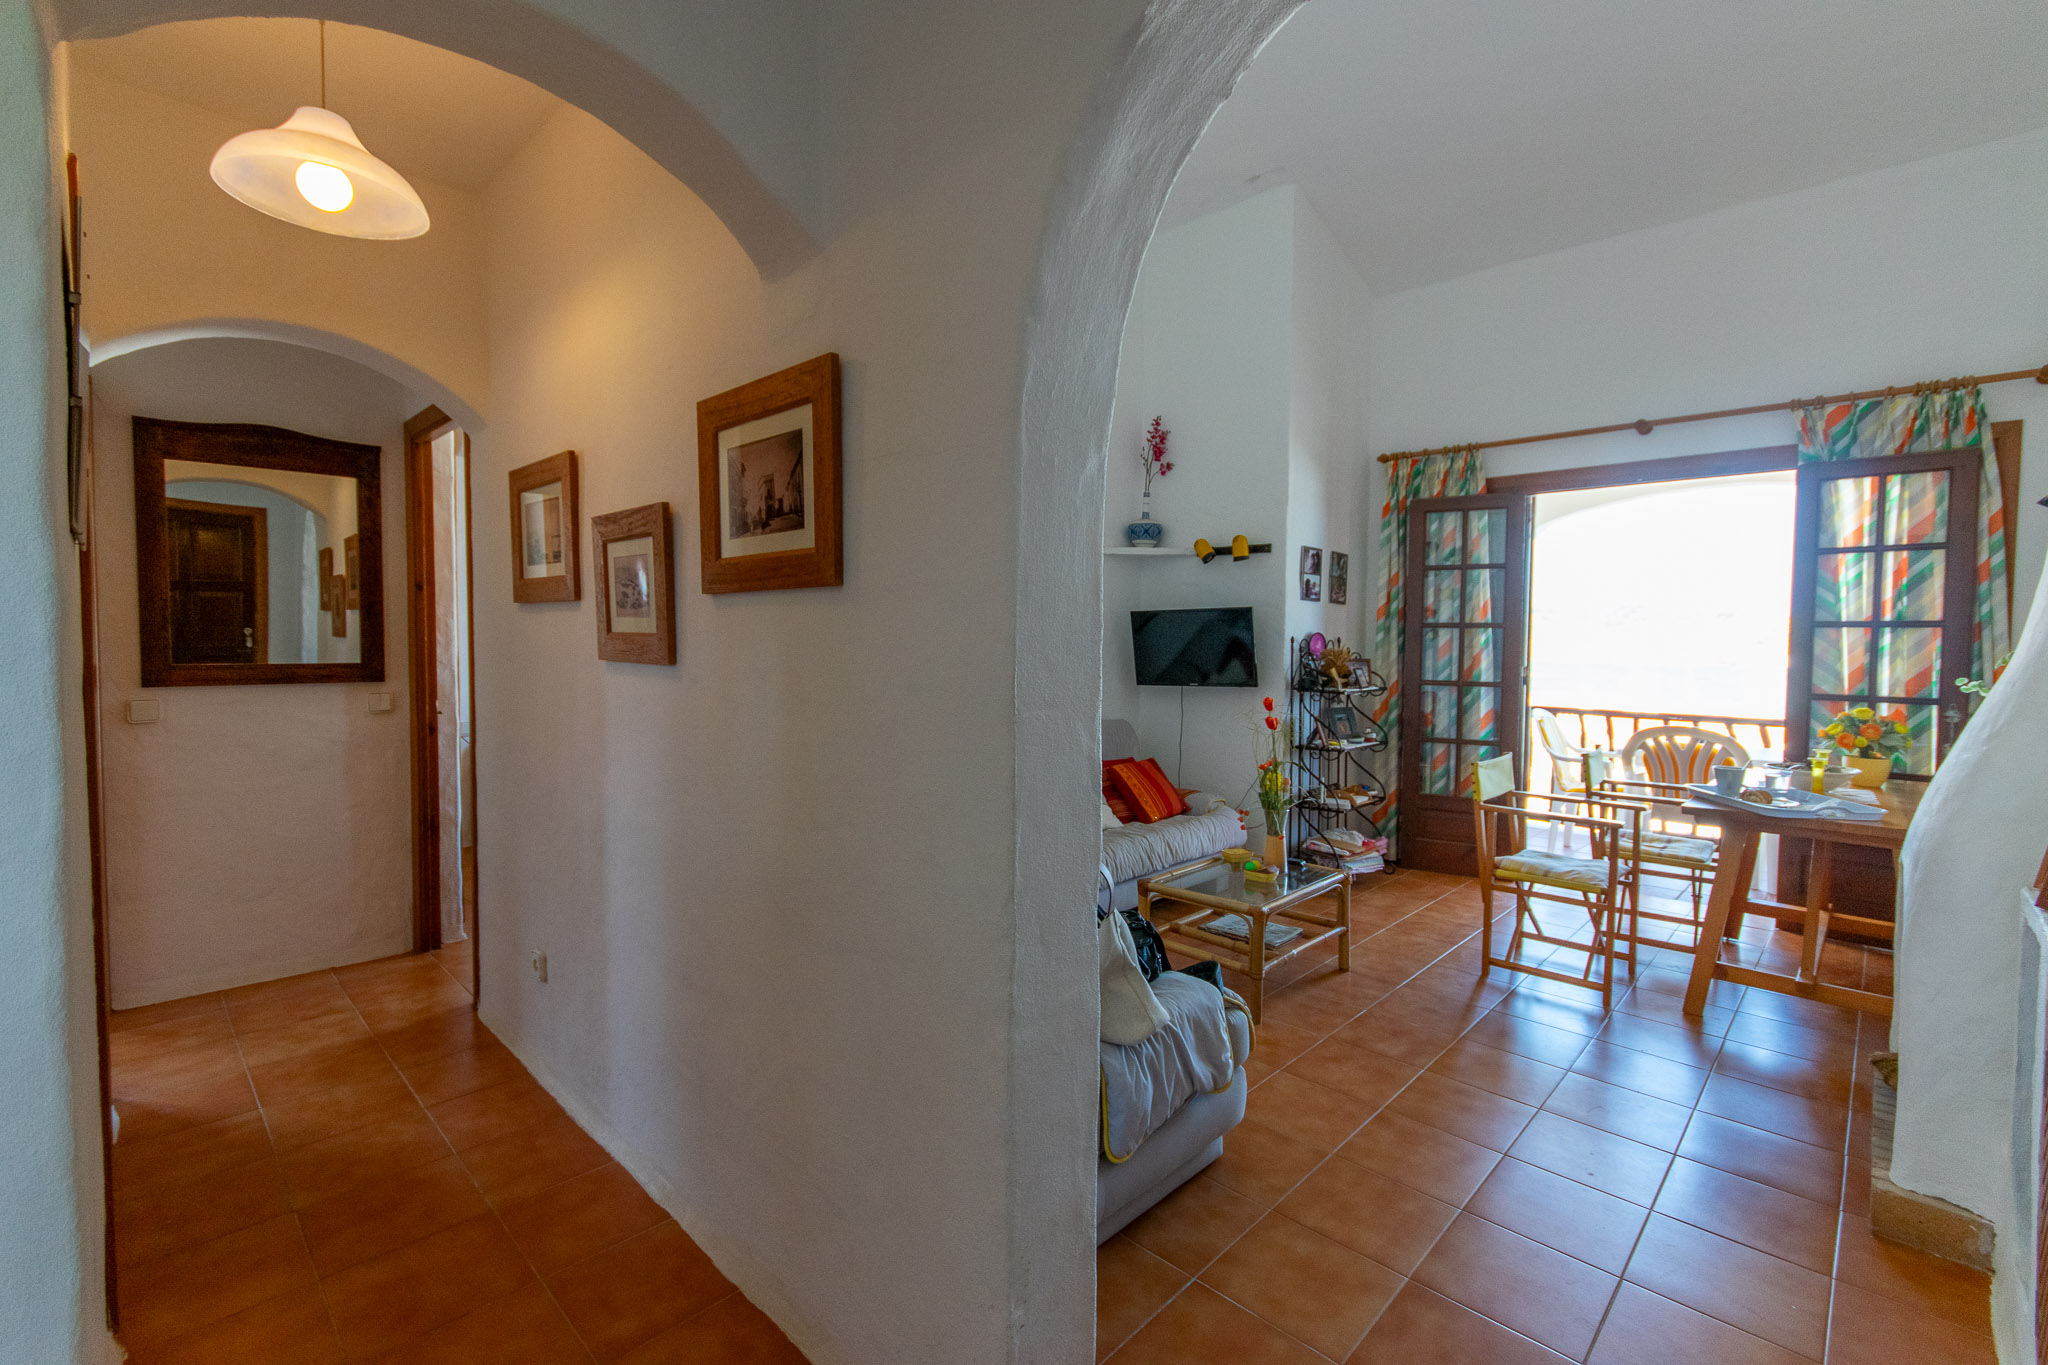 Entrance hall apartment with sea views in Playas de Fornells